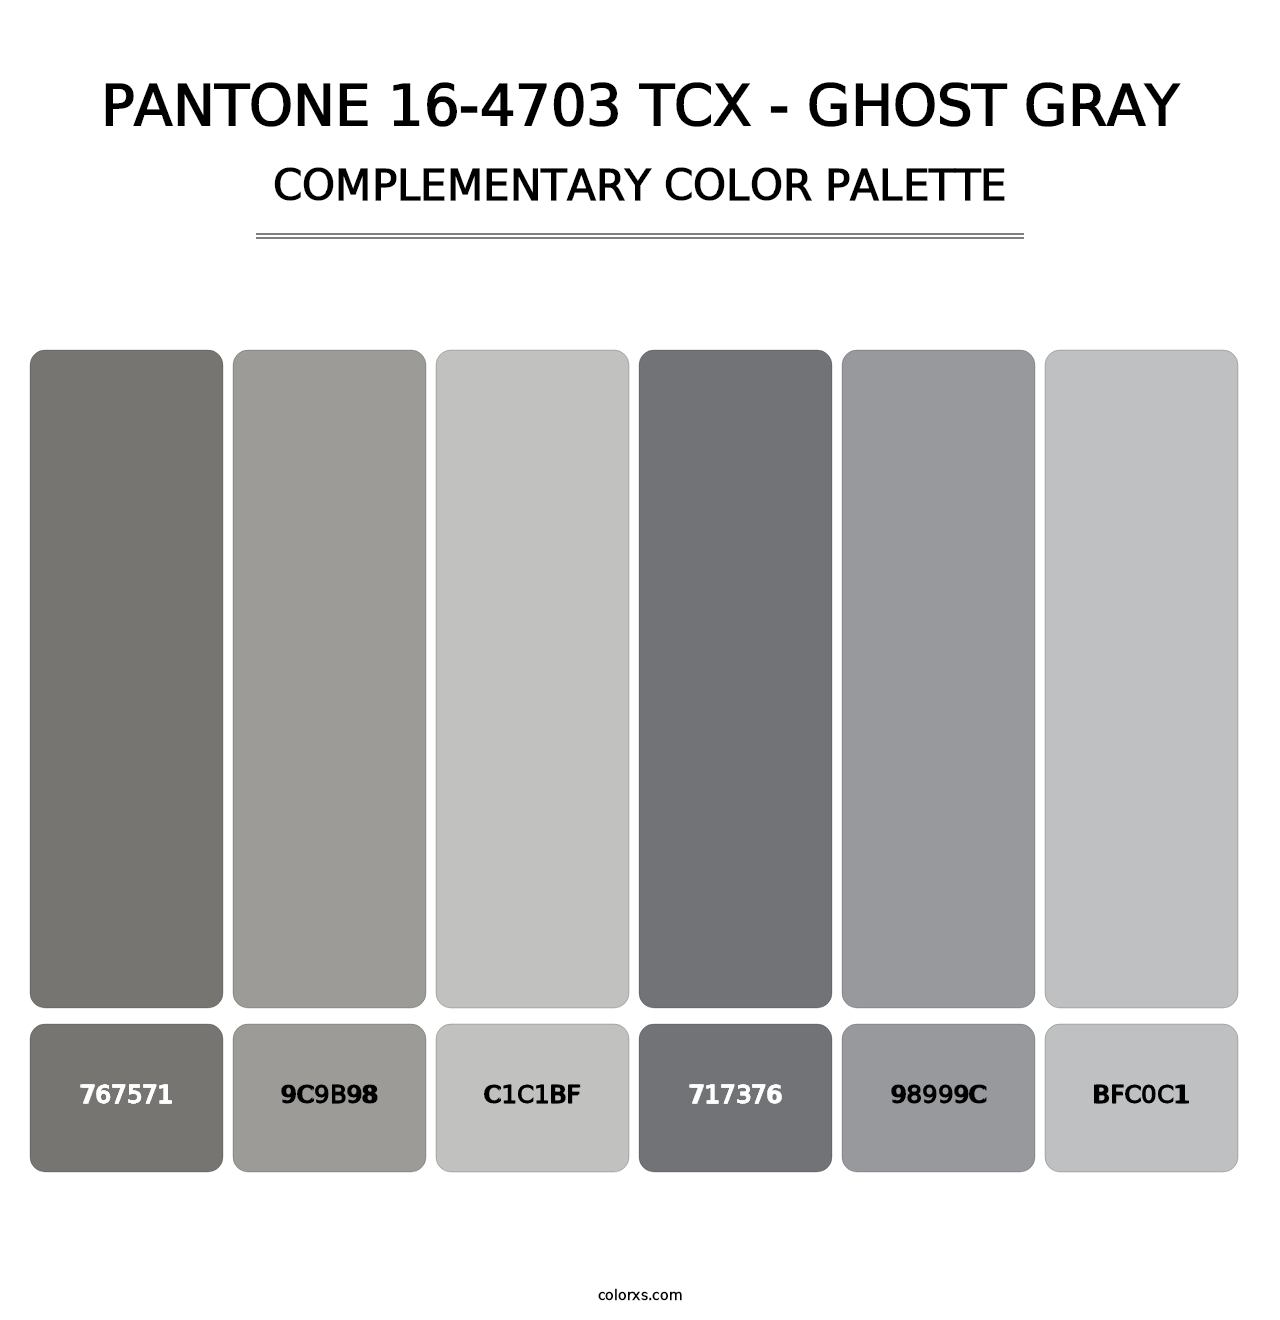 PANTONE 16-4703 TCX - Ghost Gray - Complementary Color Palette